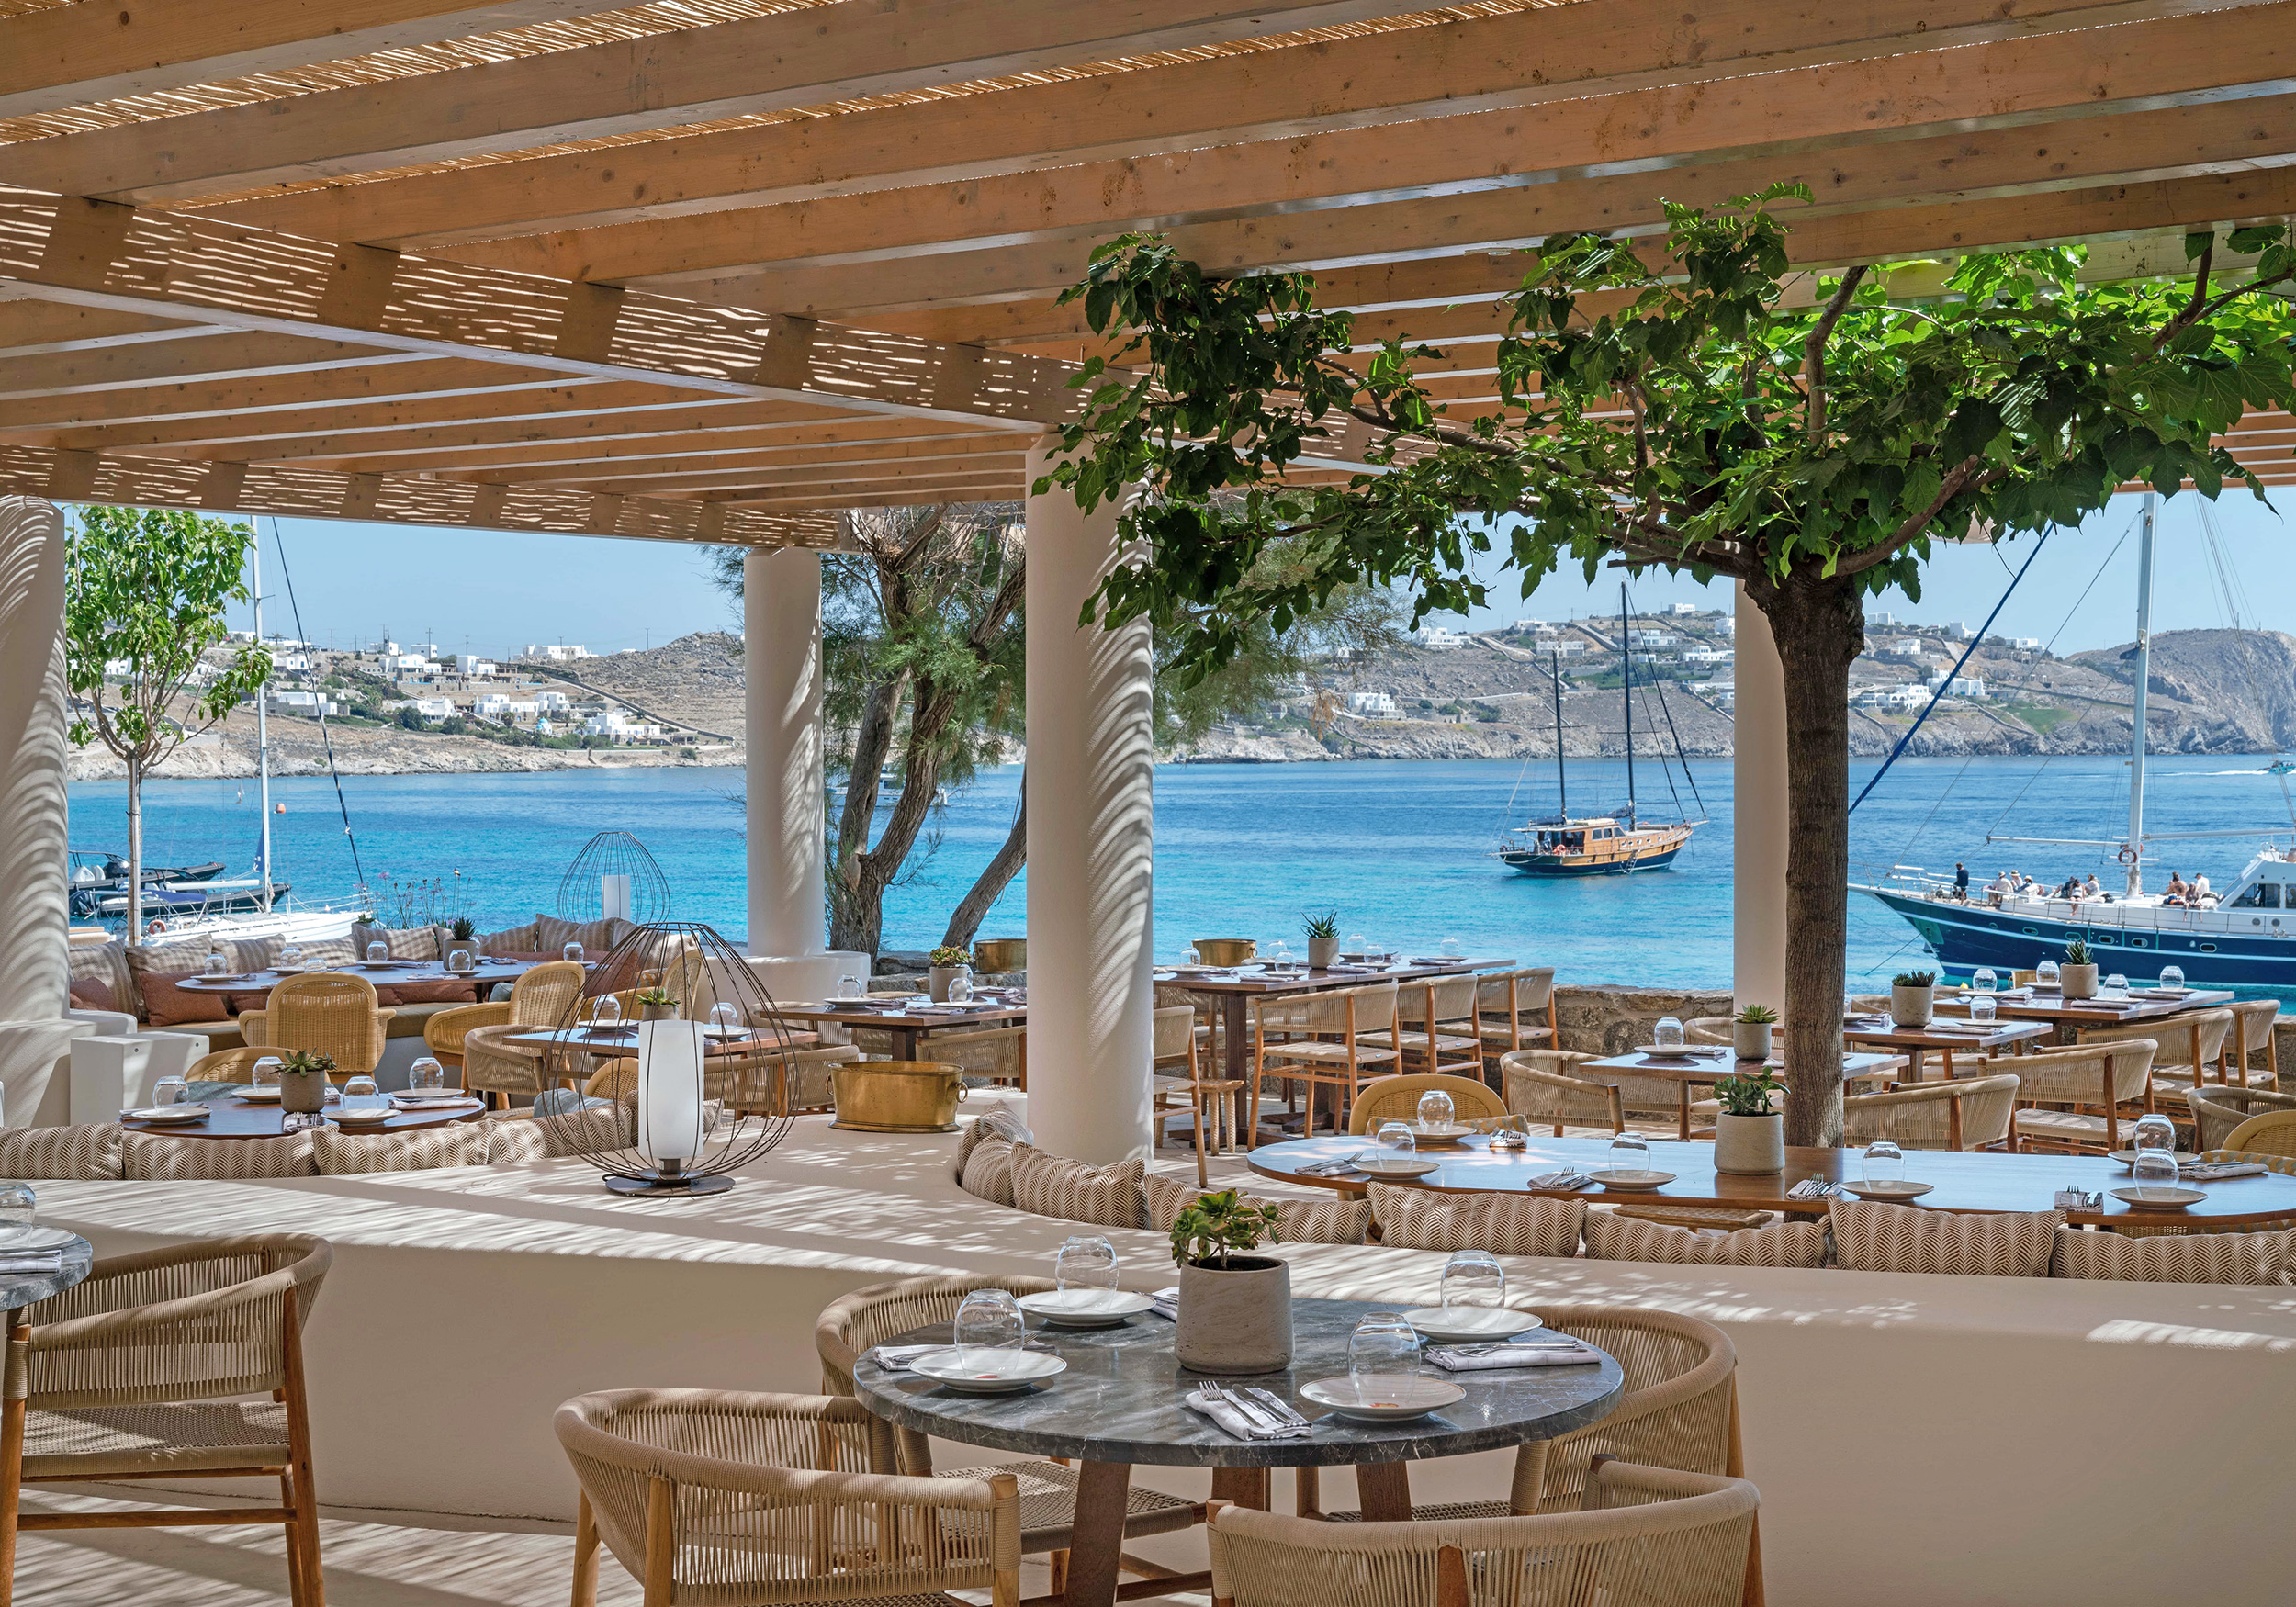 Contemporary Japanese restaurant in Ibiza with great views of